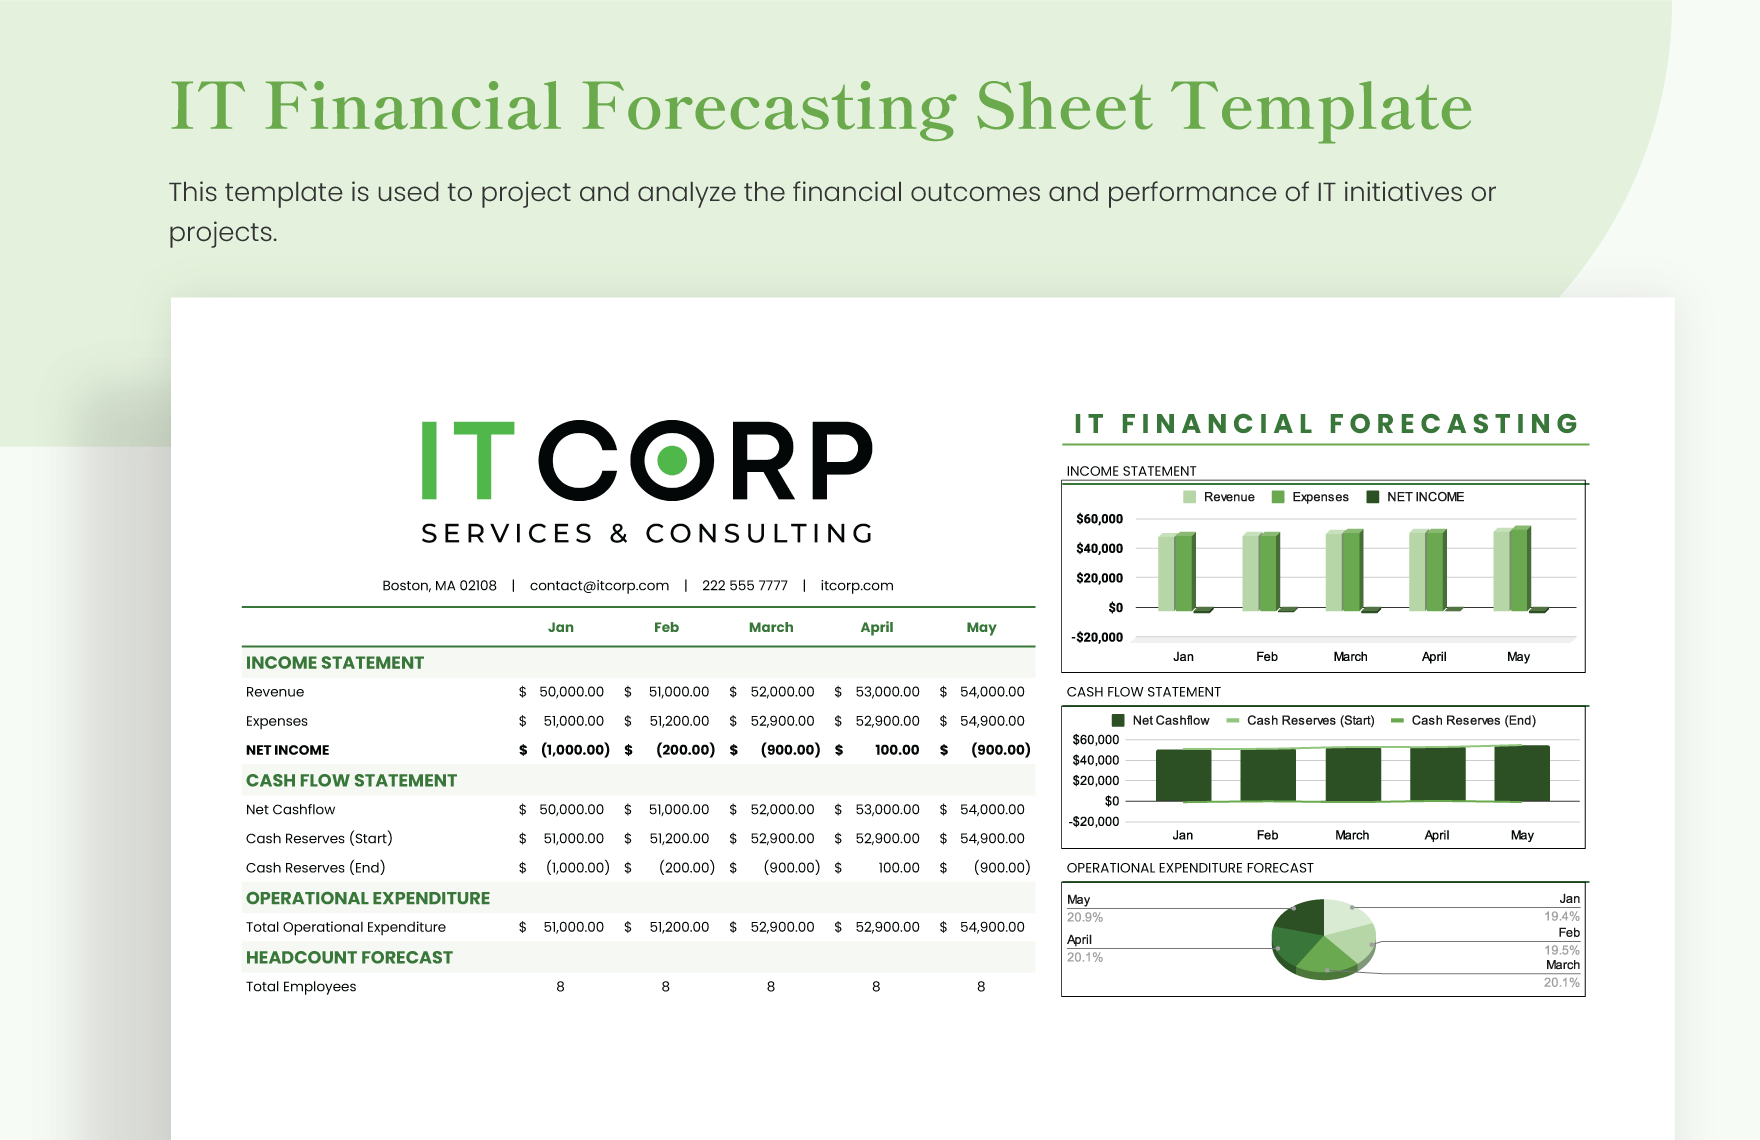 IT Financial Forecasting Sheet Template in Excel, Google Sheets